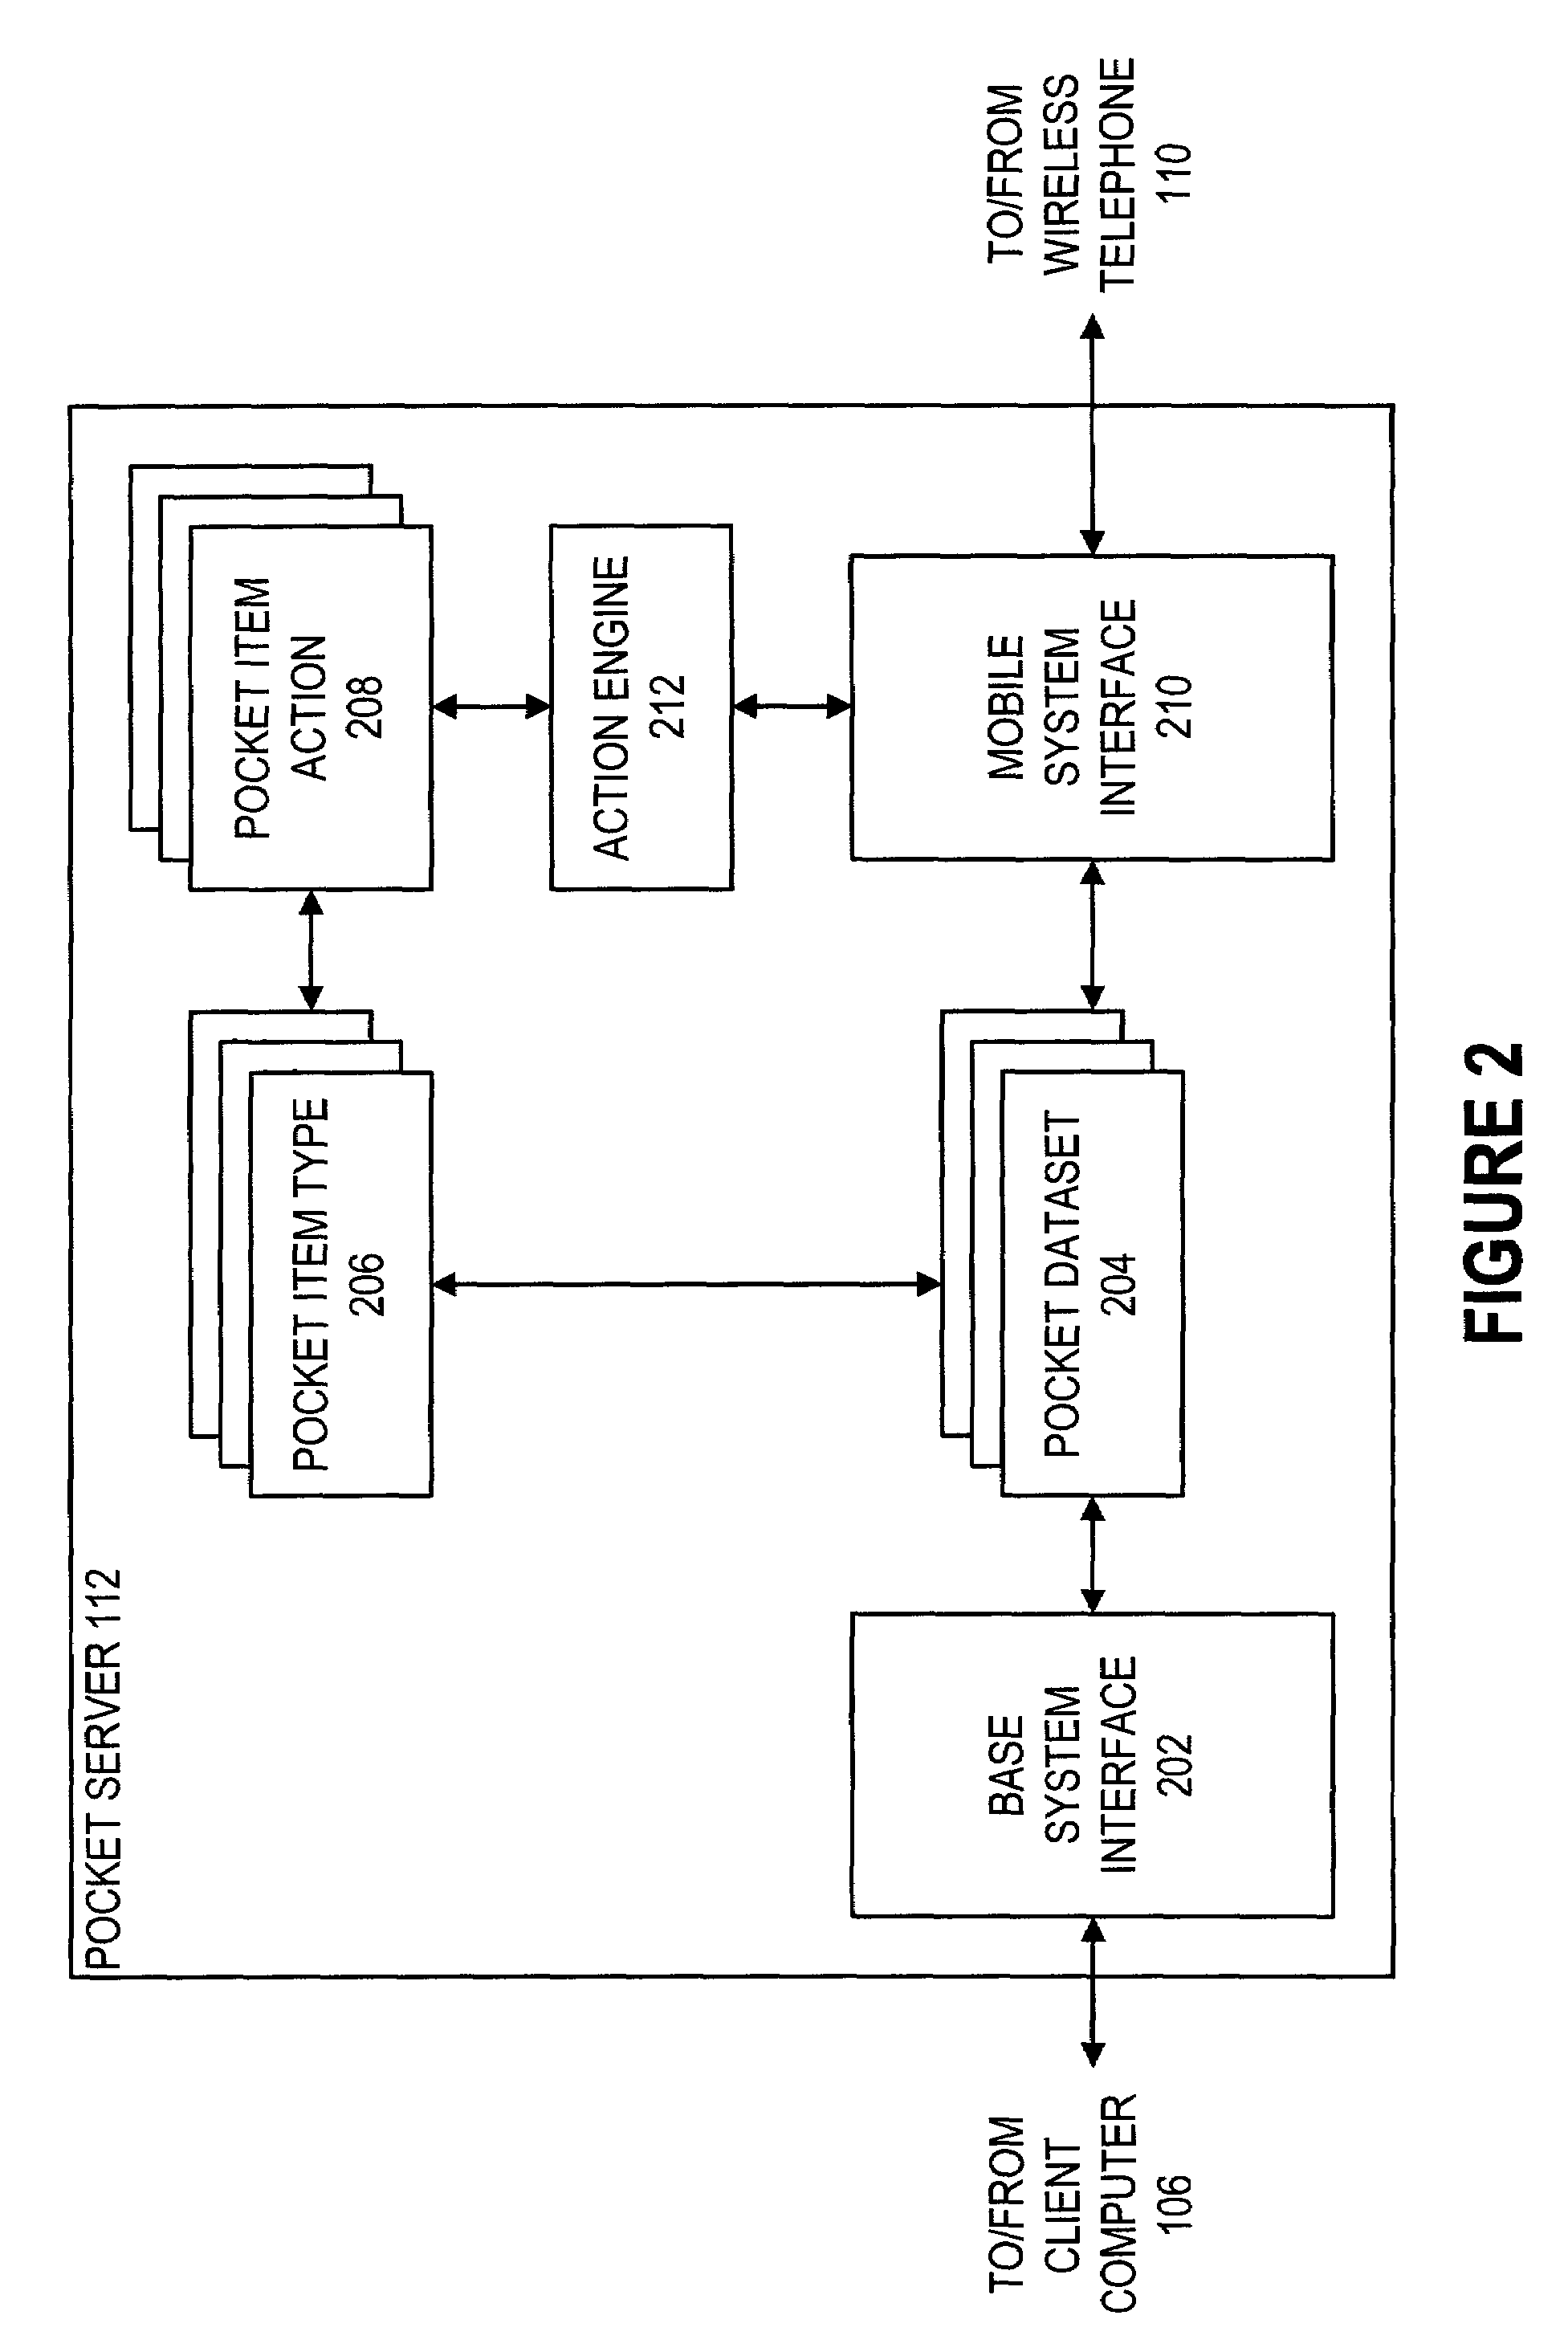 Data synchronization mechanism for information browsing systems